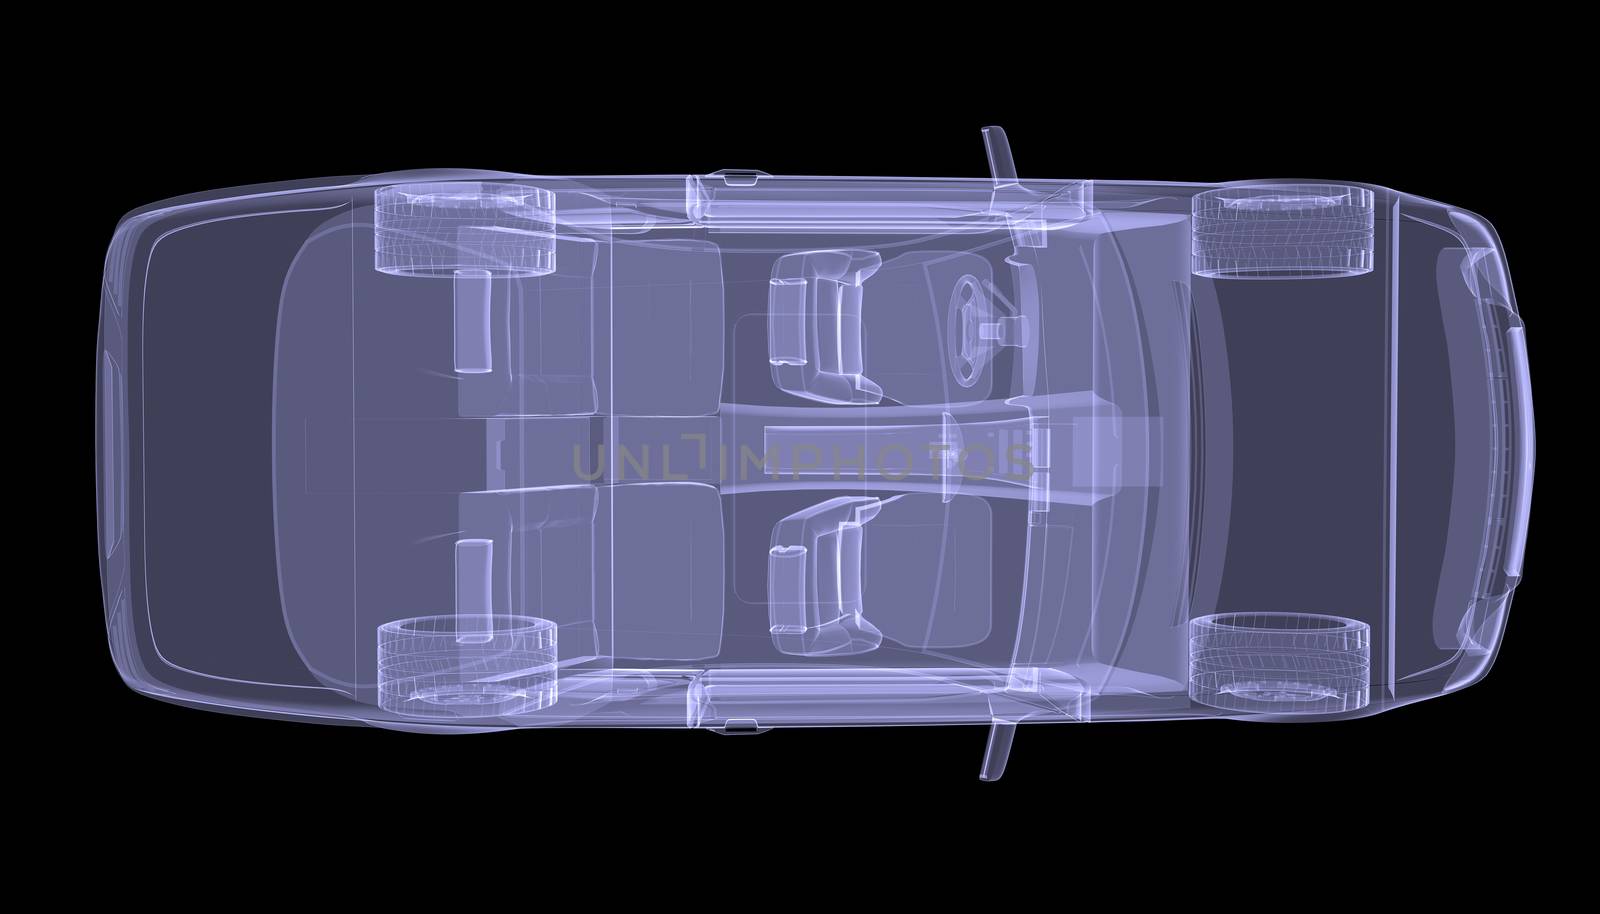 X-ray concept car. Top view. Isolated render on a black background